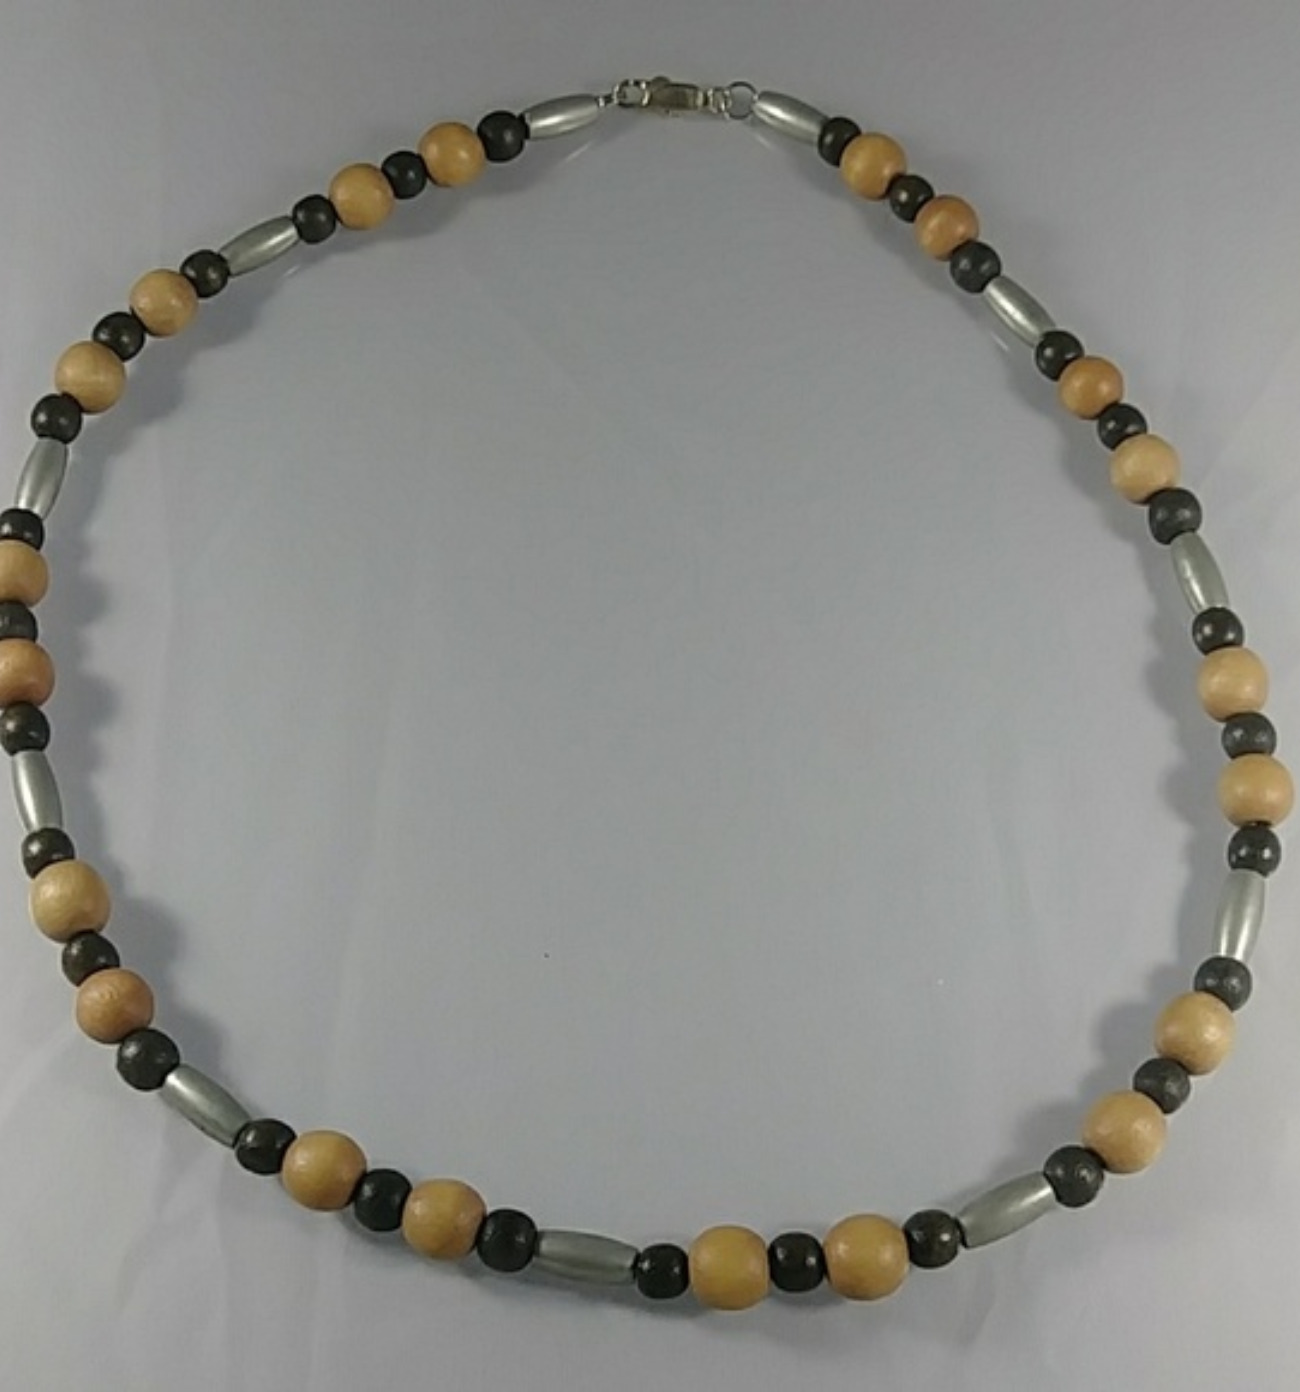 (375-NCK-MEN) - Description: Wood Beads, Sterling Silver Lobster Claw, Silver Tone Barrel Beads - Dimension: 18' L (Inches)